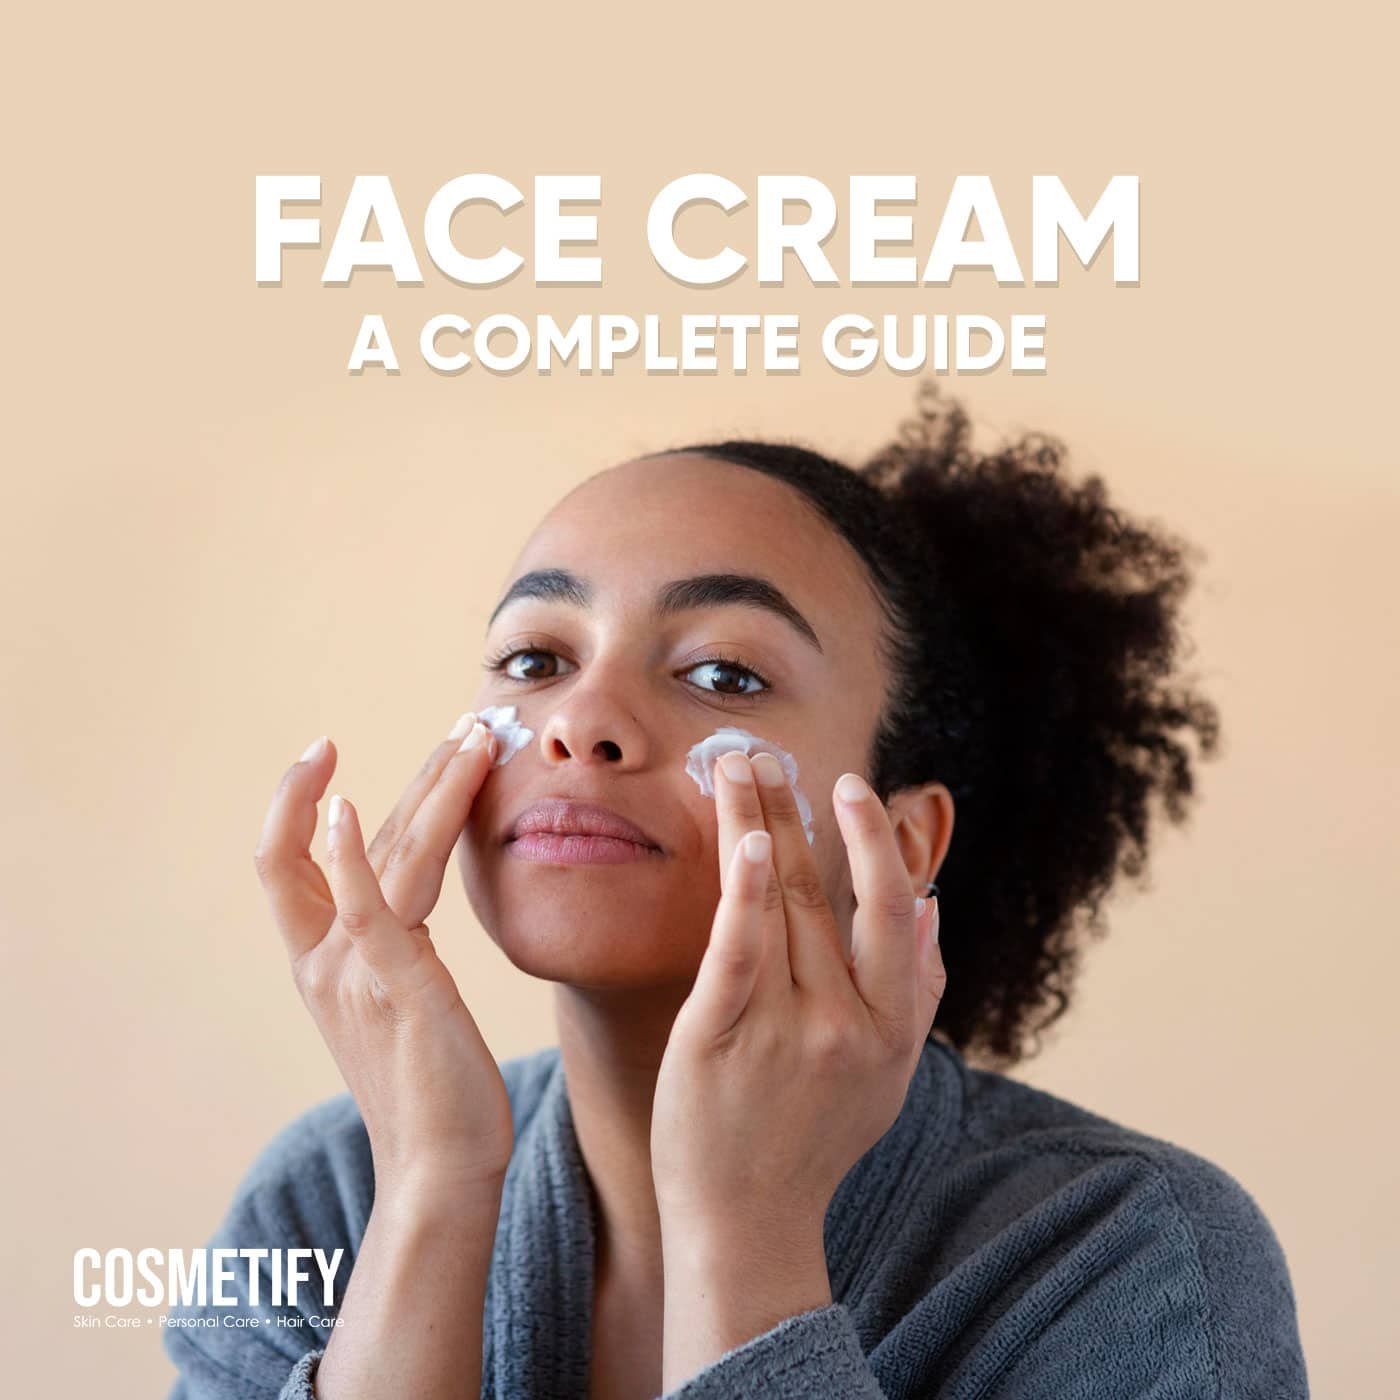 What to Look for in a Face Cream?